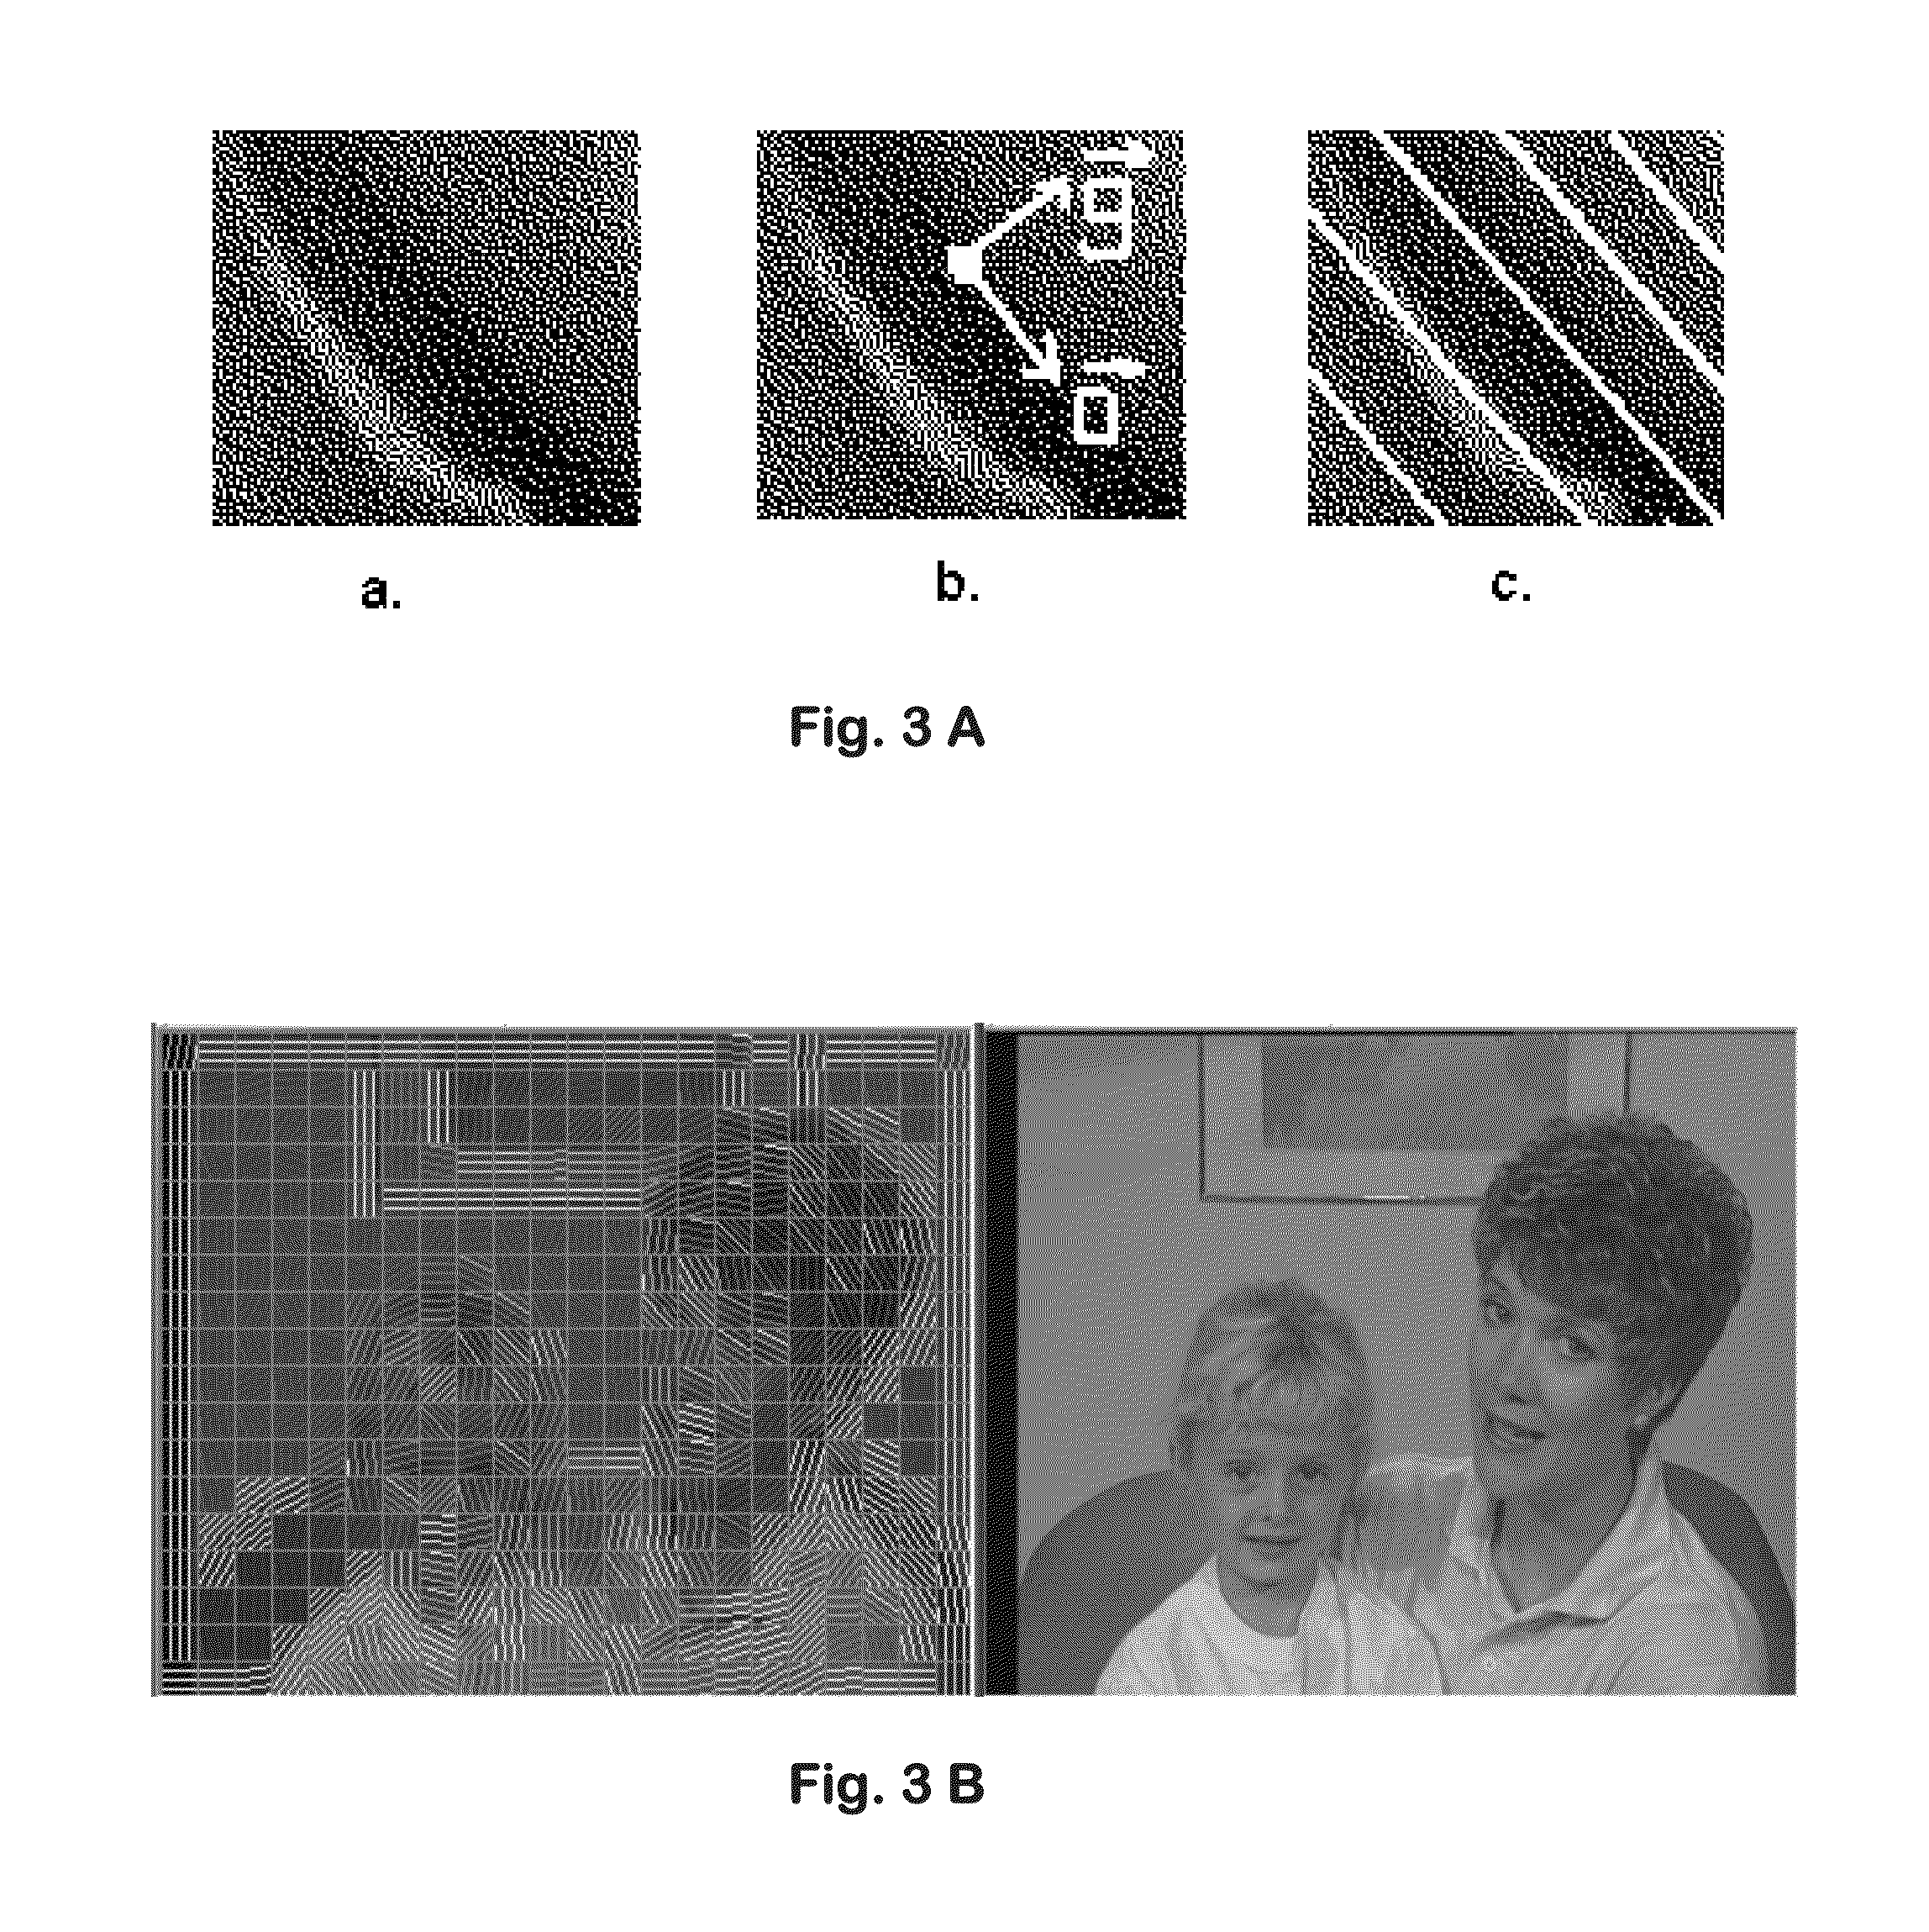 Video compression for high efficiency video coding